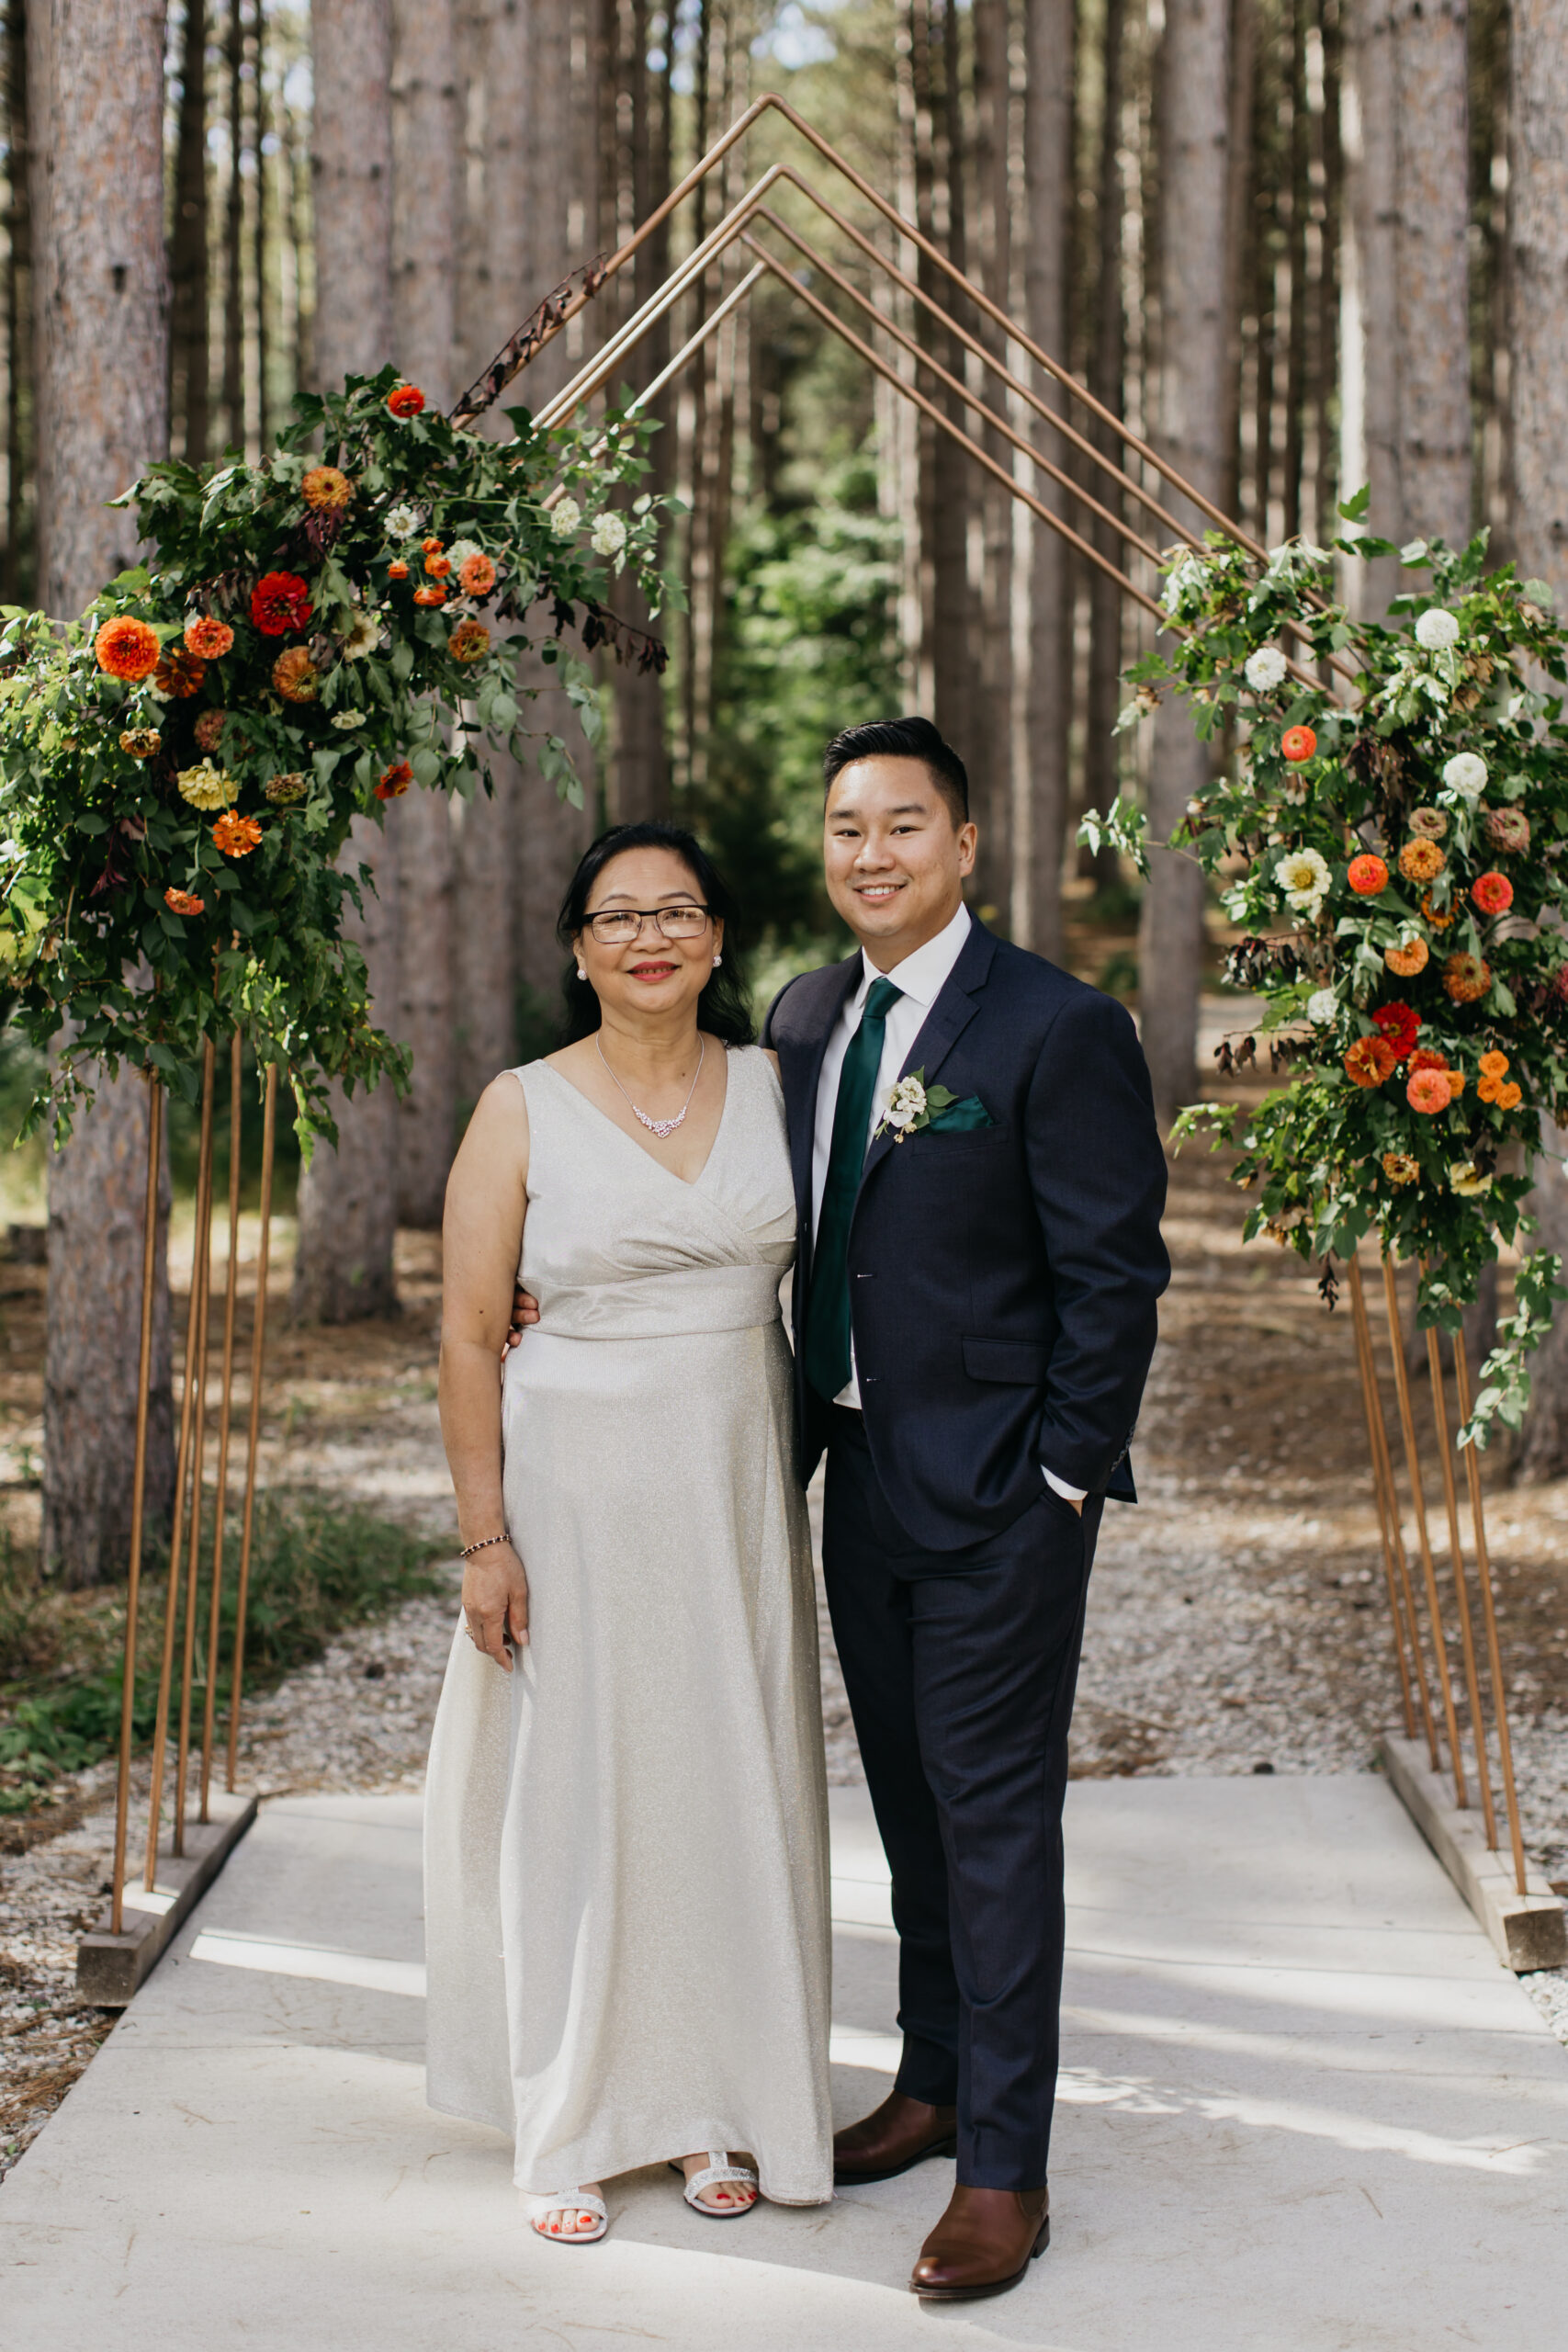 A photo of the groom and his mother during the wedding ceremony